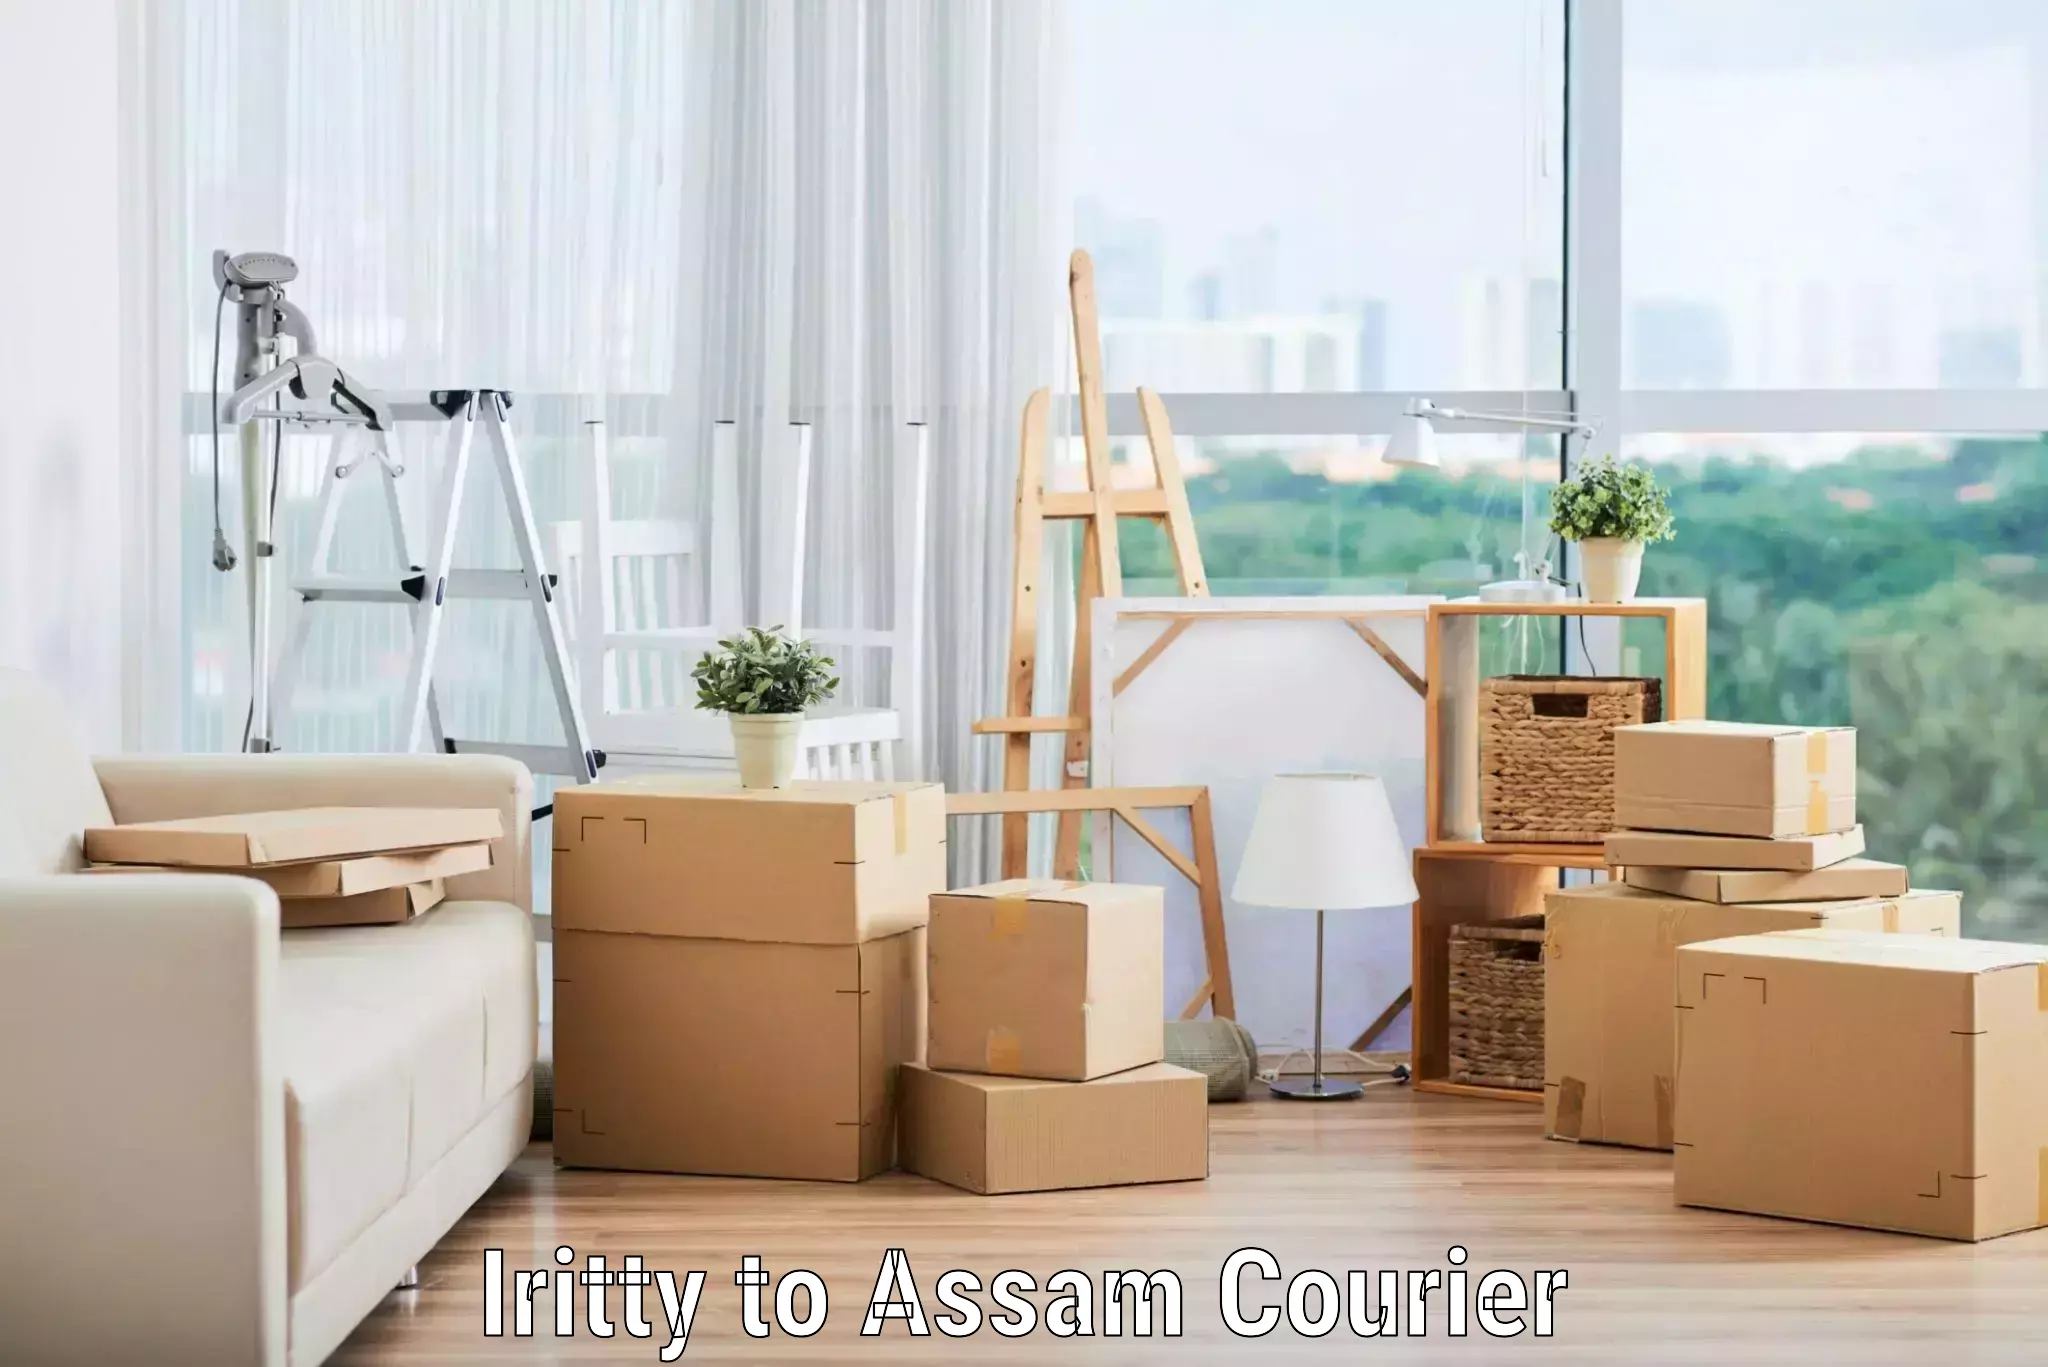 Budget-friendly movers Iritty to Lala Assam